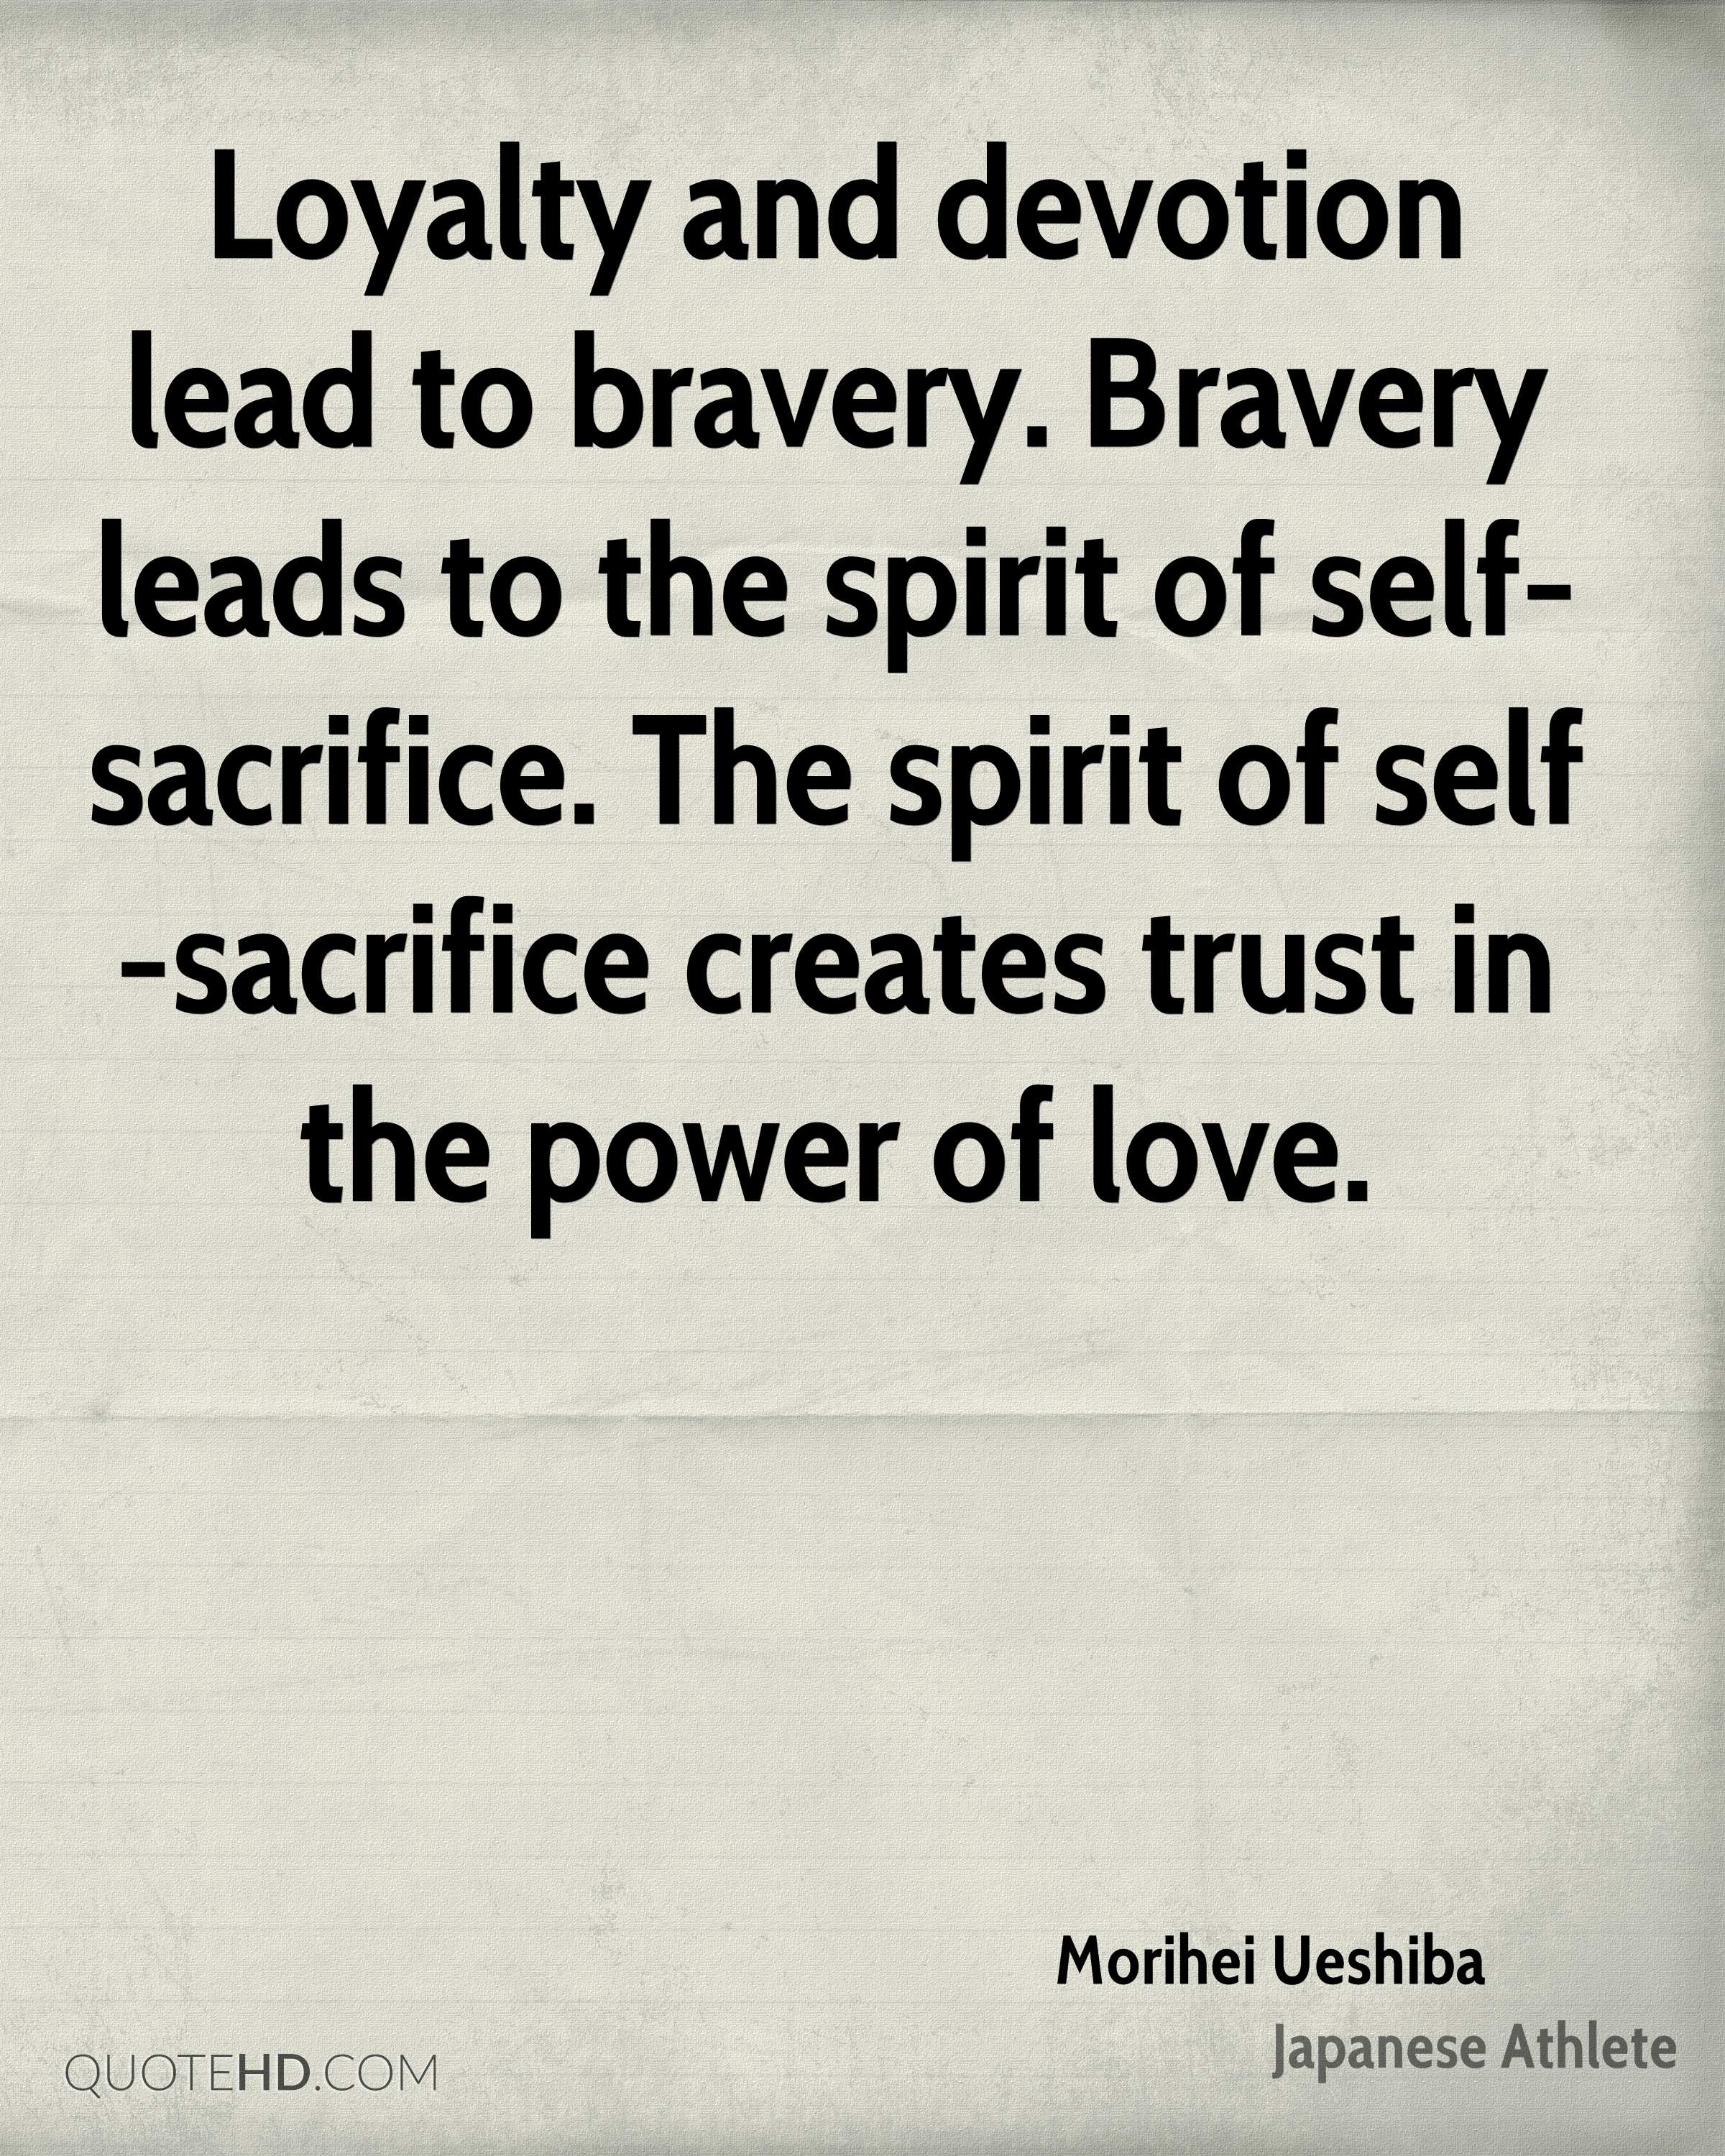 Loyalty and devotion lead to bravery Bravery leads to the spirit of self sacrifice